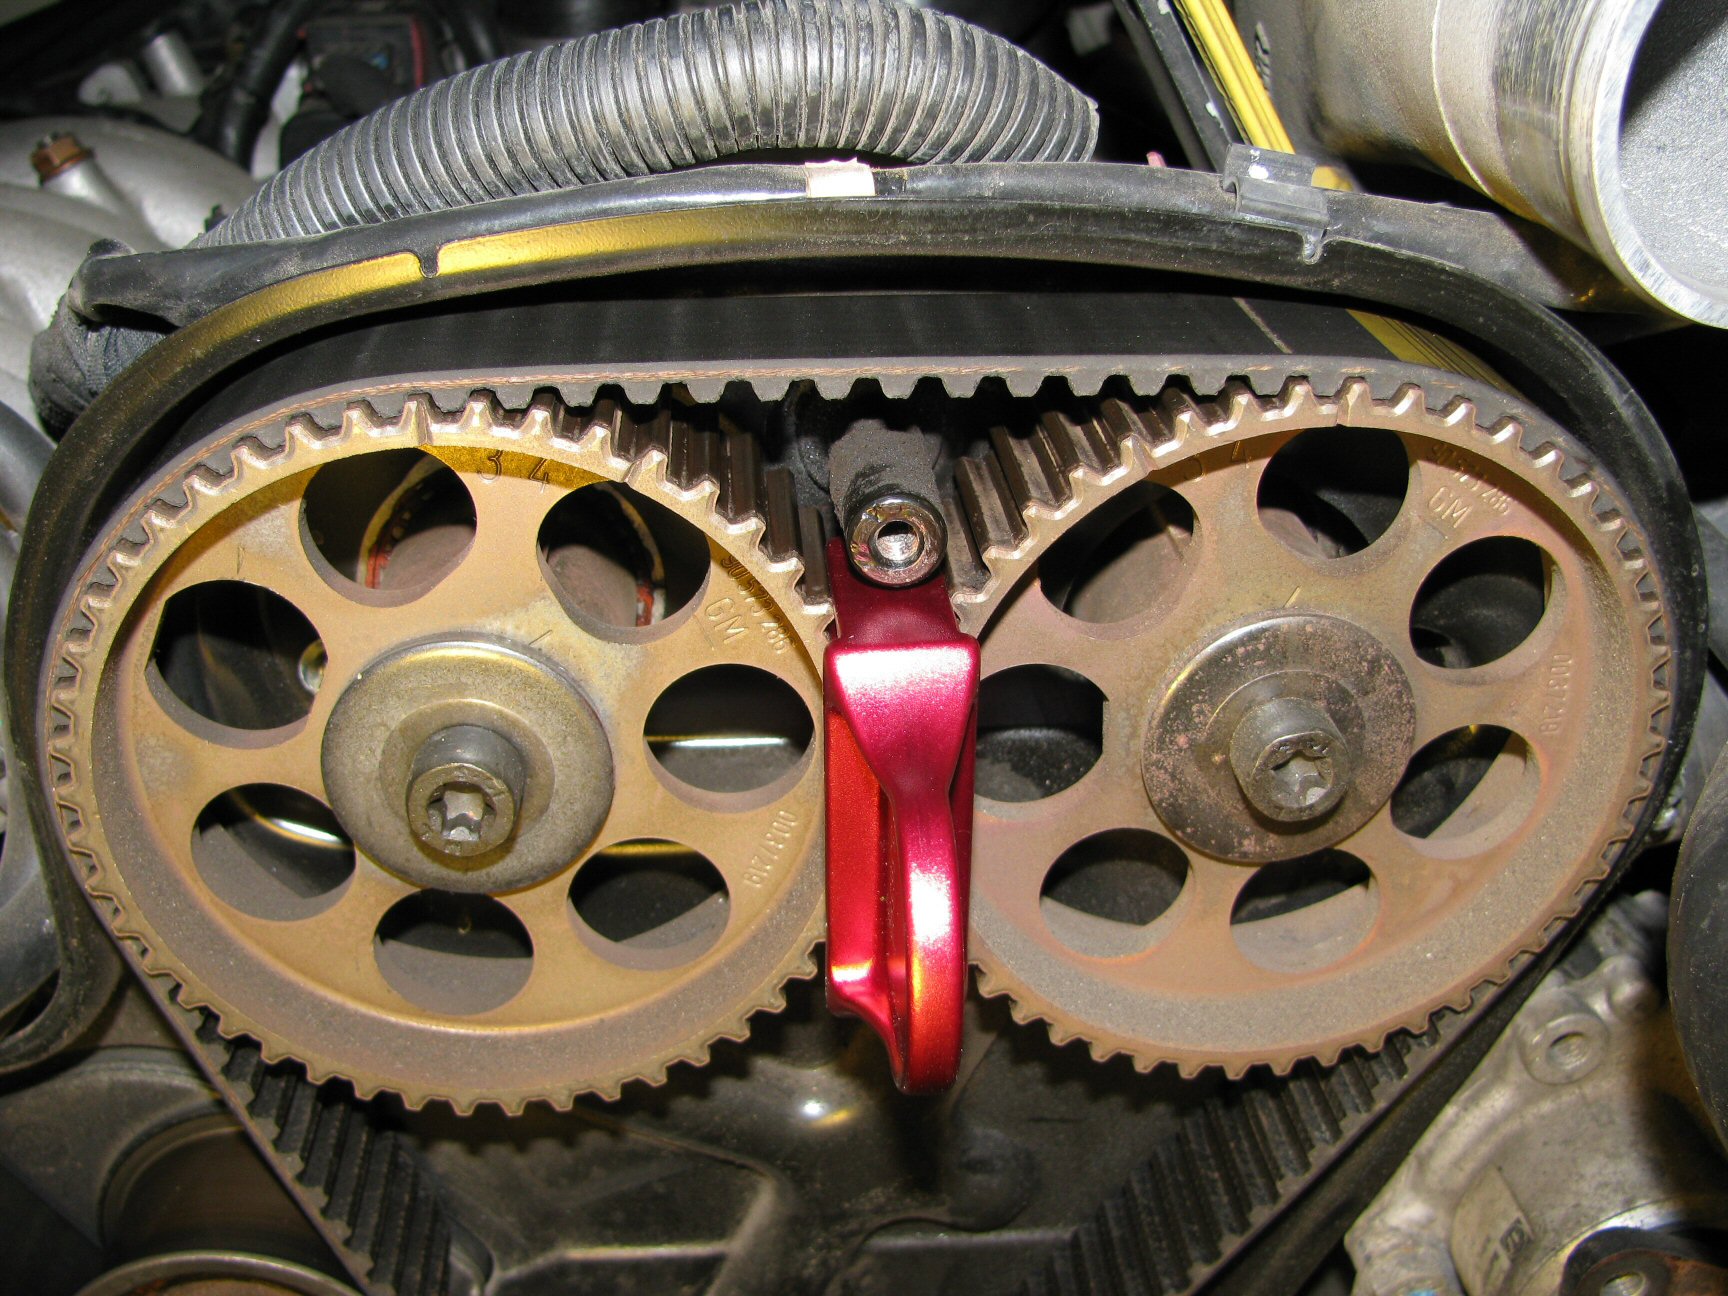 Camshaft pulleys 3 (left) and 4 (right).